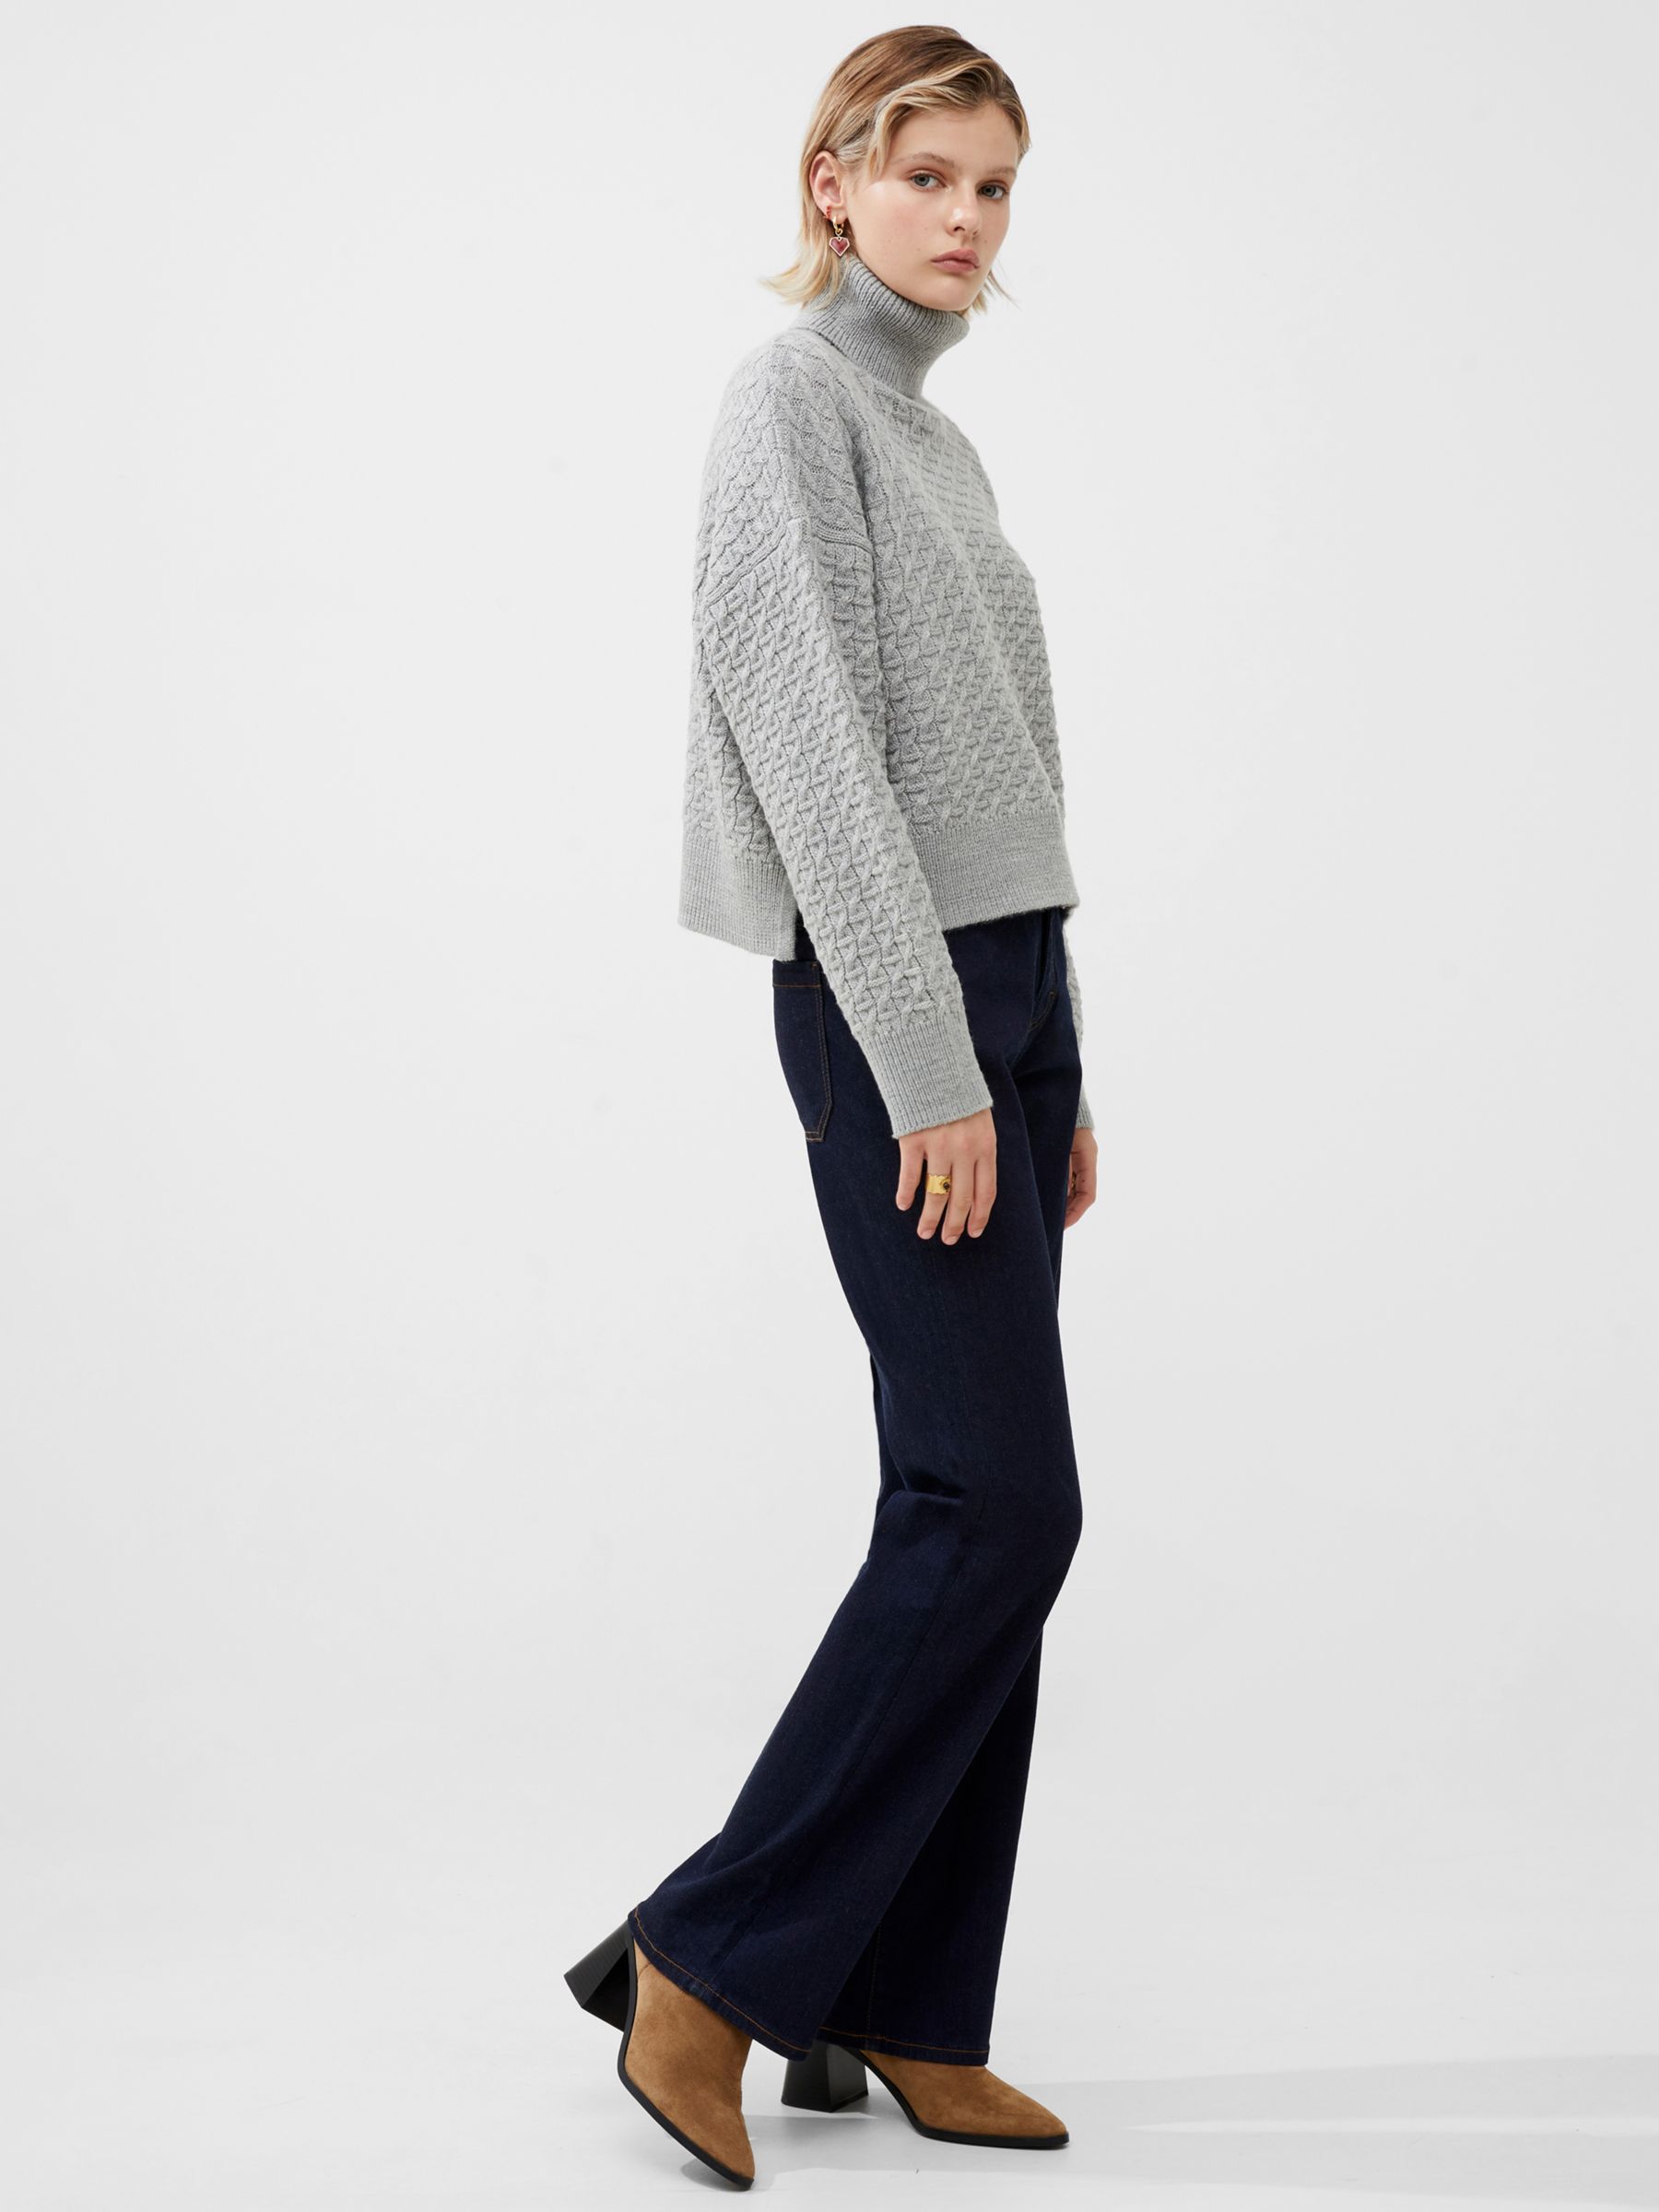 French Connection Jini Cable Knit Jumper, Light Grey Melange, XS